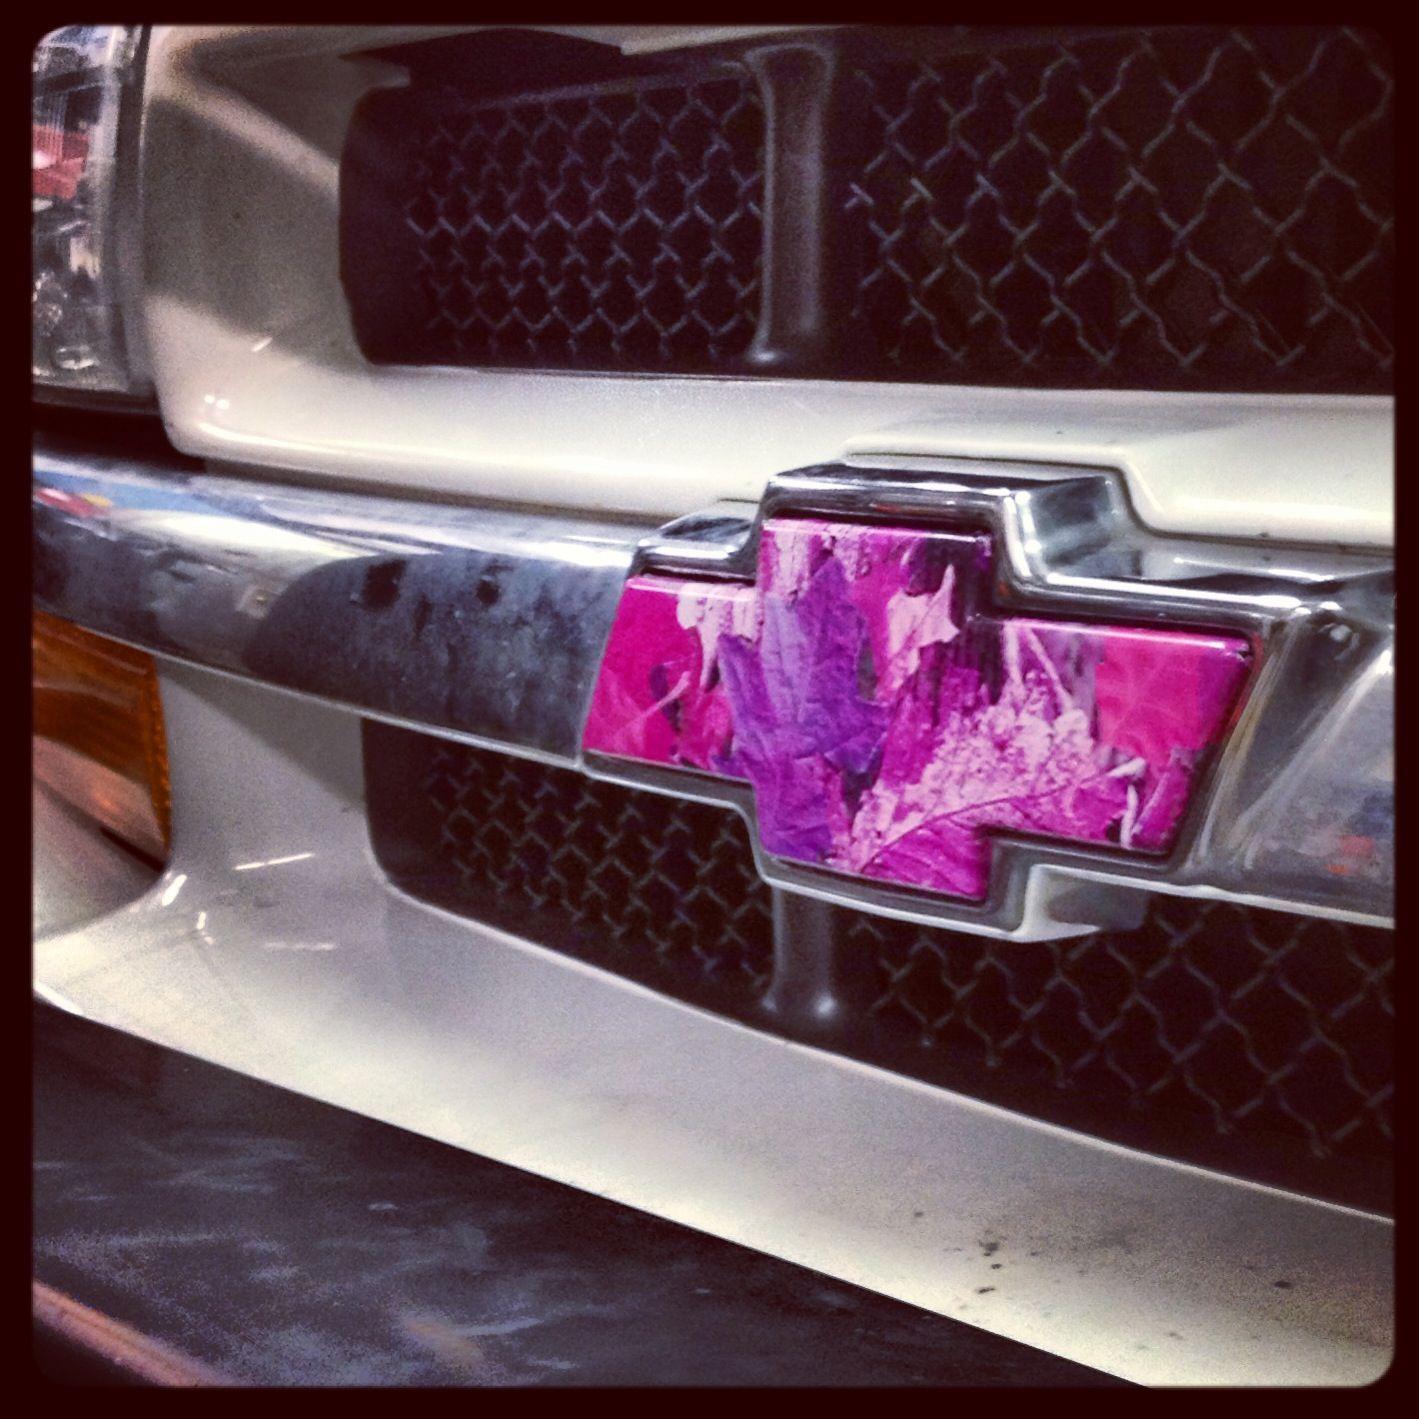 Camo Chevy Logo - Chevy girl, pink camo, Chevy emblem, country girl pick up truck